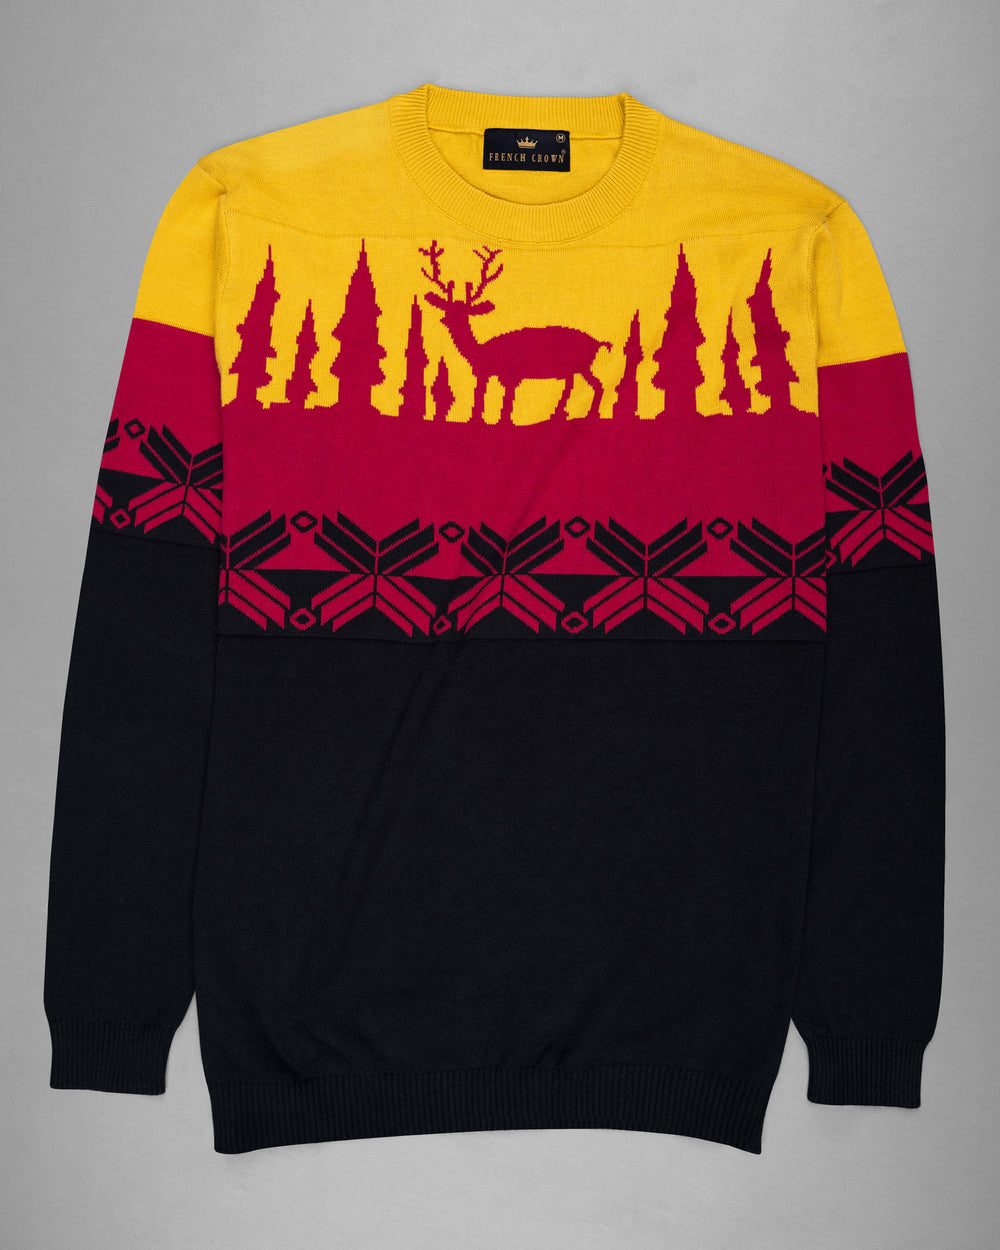 GOLD TIPS WITH CARMINE RED AND BLACK JACQUARD DEER TEXTURED SUPER SOFT PREMIUM JERSEY SWEATSHIRT